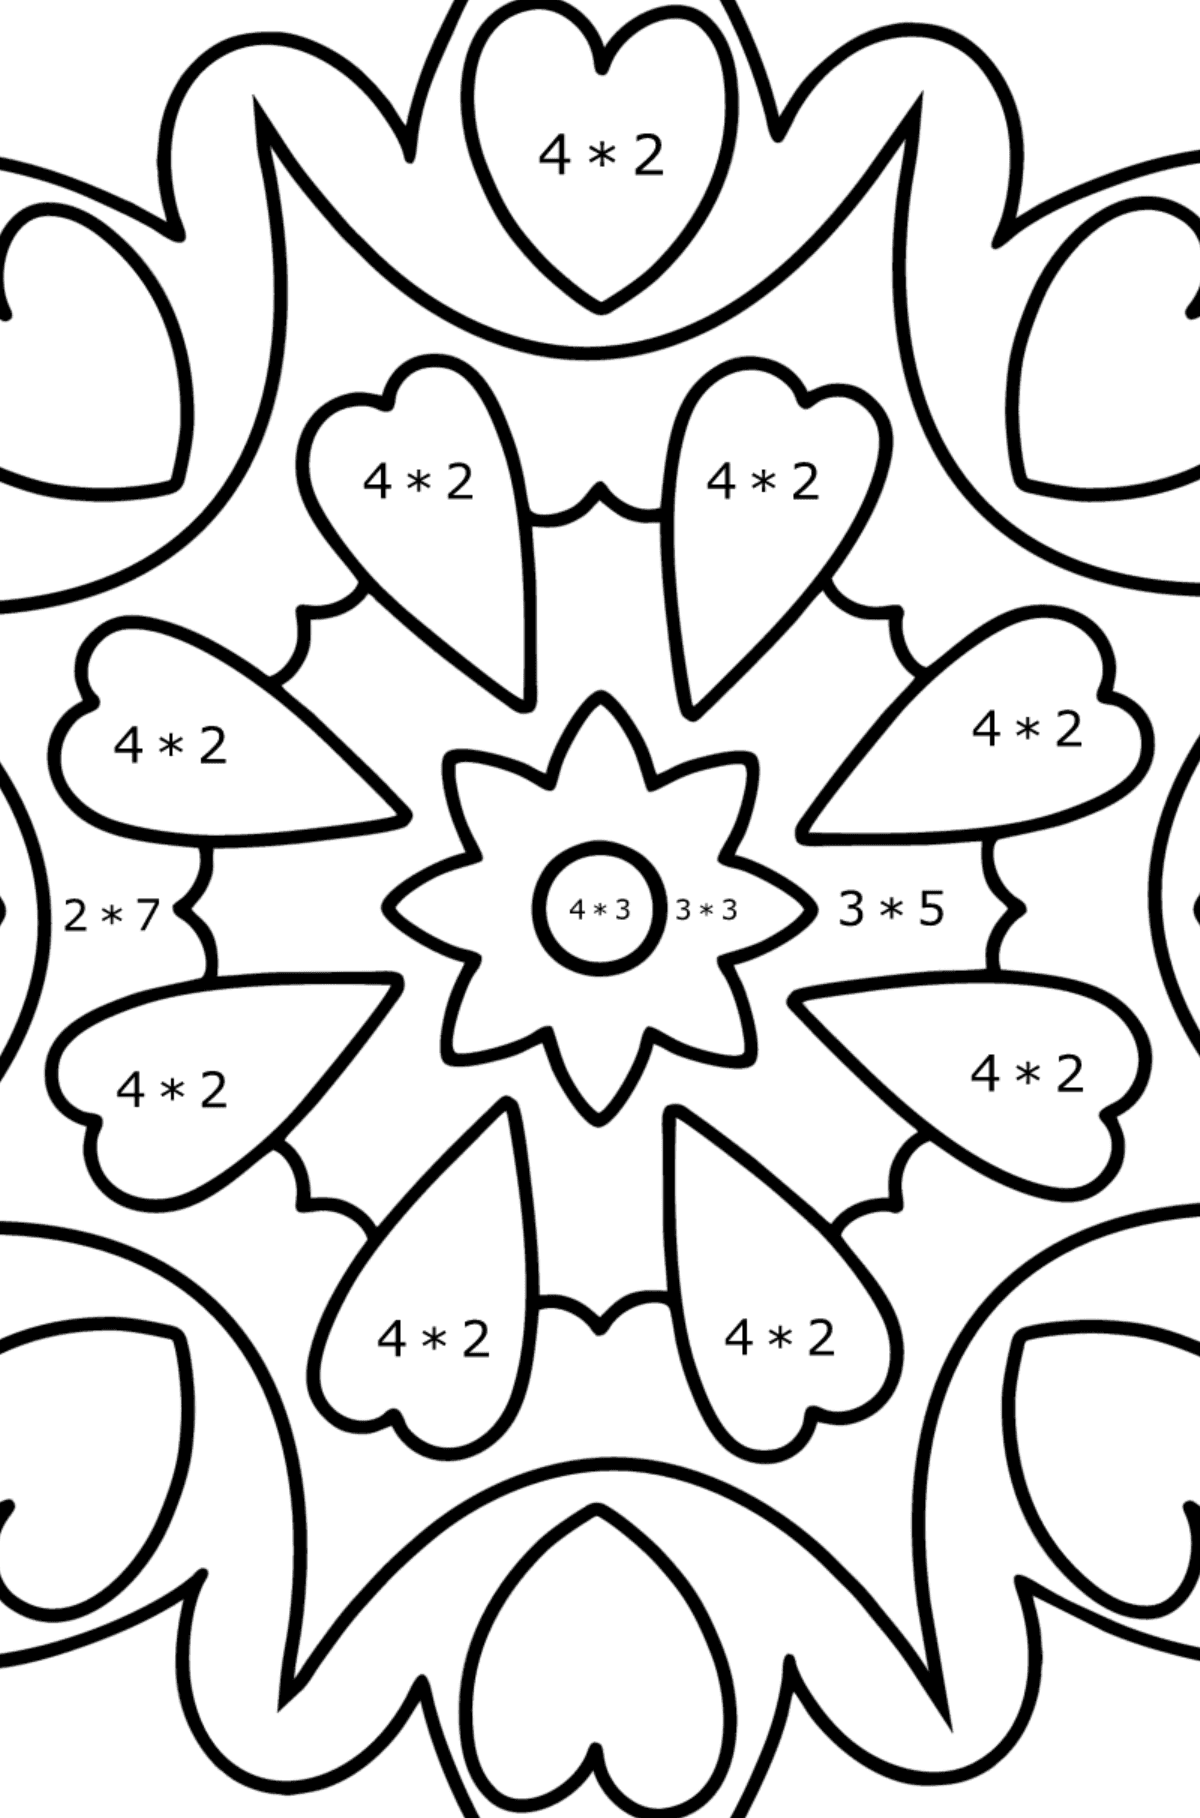 Mandala coloring page - 21 elements - Math Coloring - Multiplication for Kids